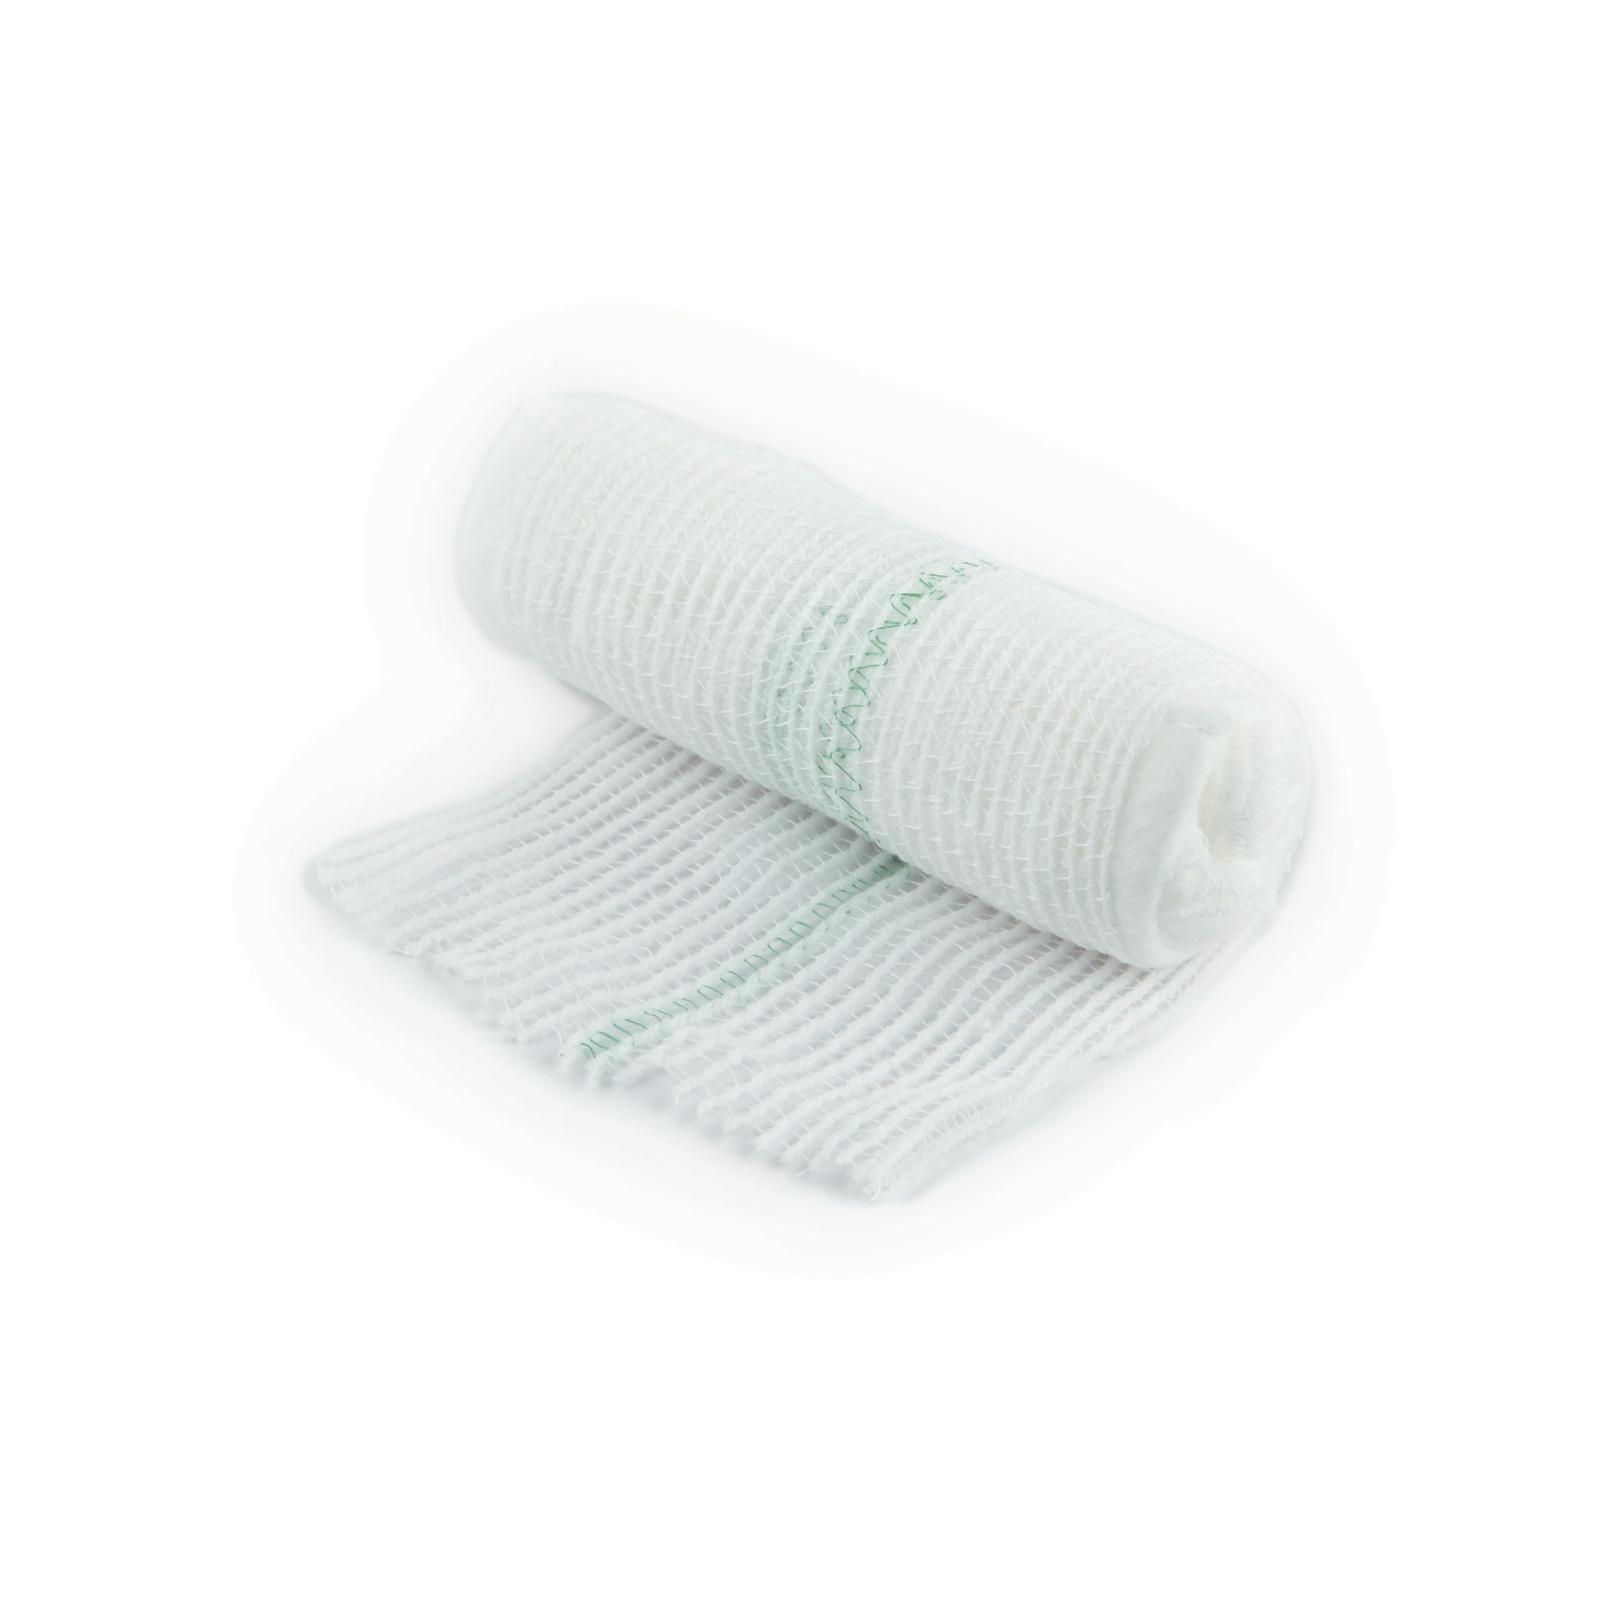 Dressing with Bandage - 180 x 180mm - Each